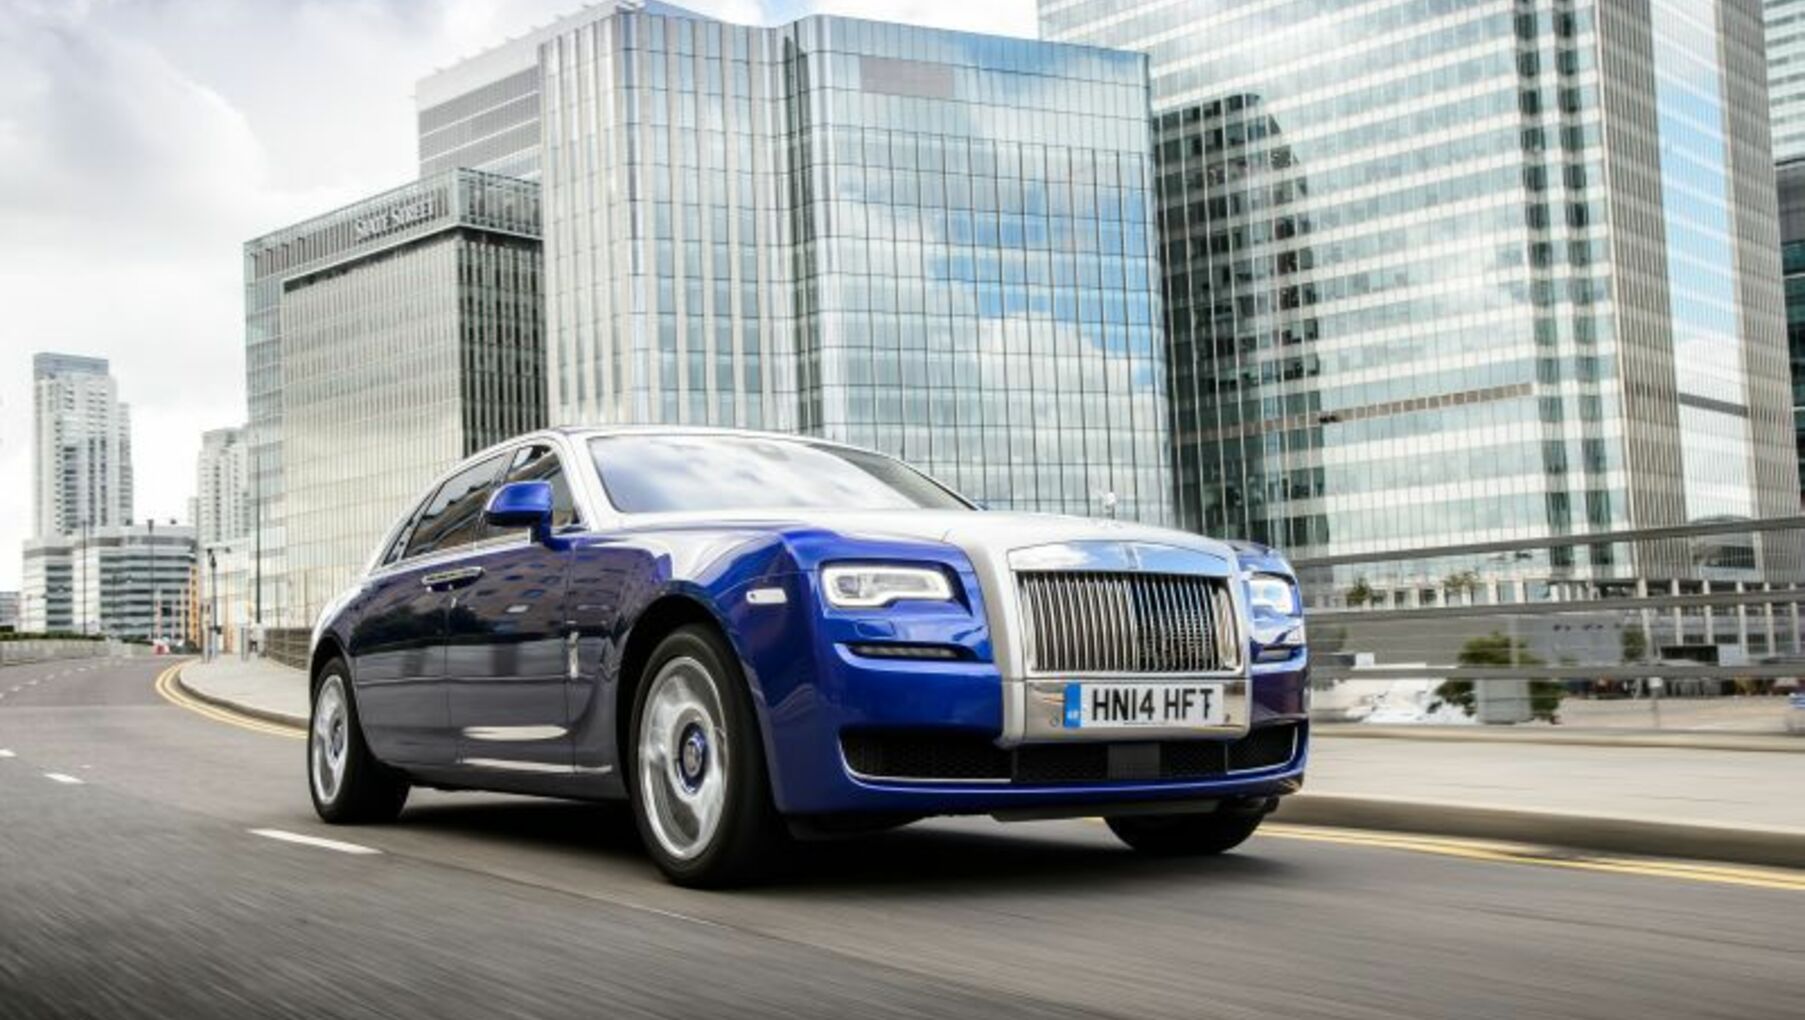 Rolls-Royce Ghost Extended Wheelbase I (facelift 2014) 6.6 V12 (570 Hp) Automatic 2014, 2015, 2016, 2017, 2018, 2019, 2020 